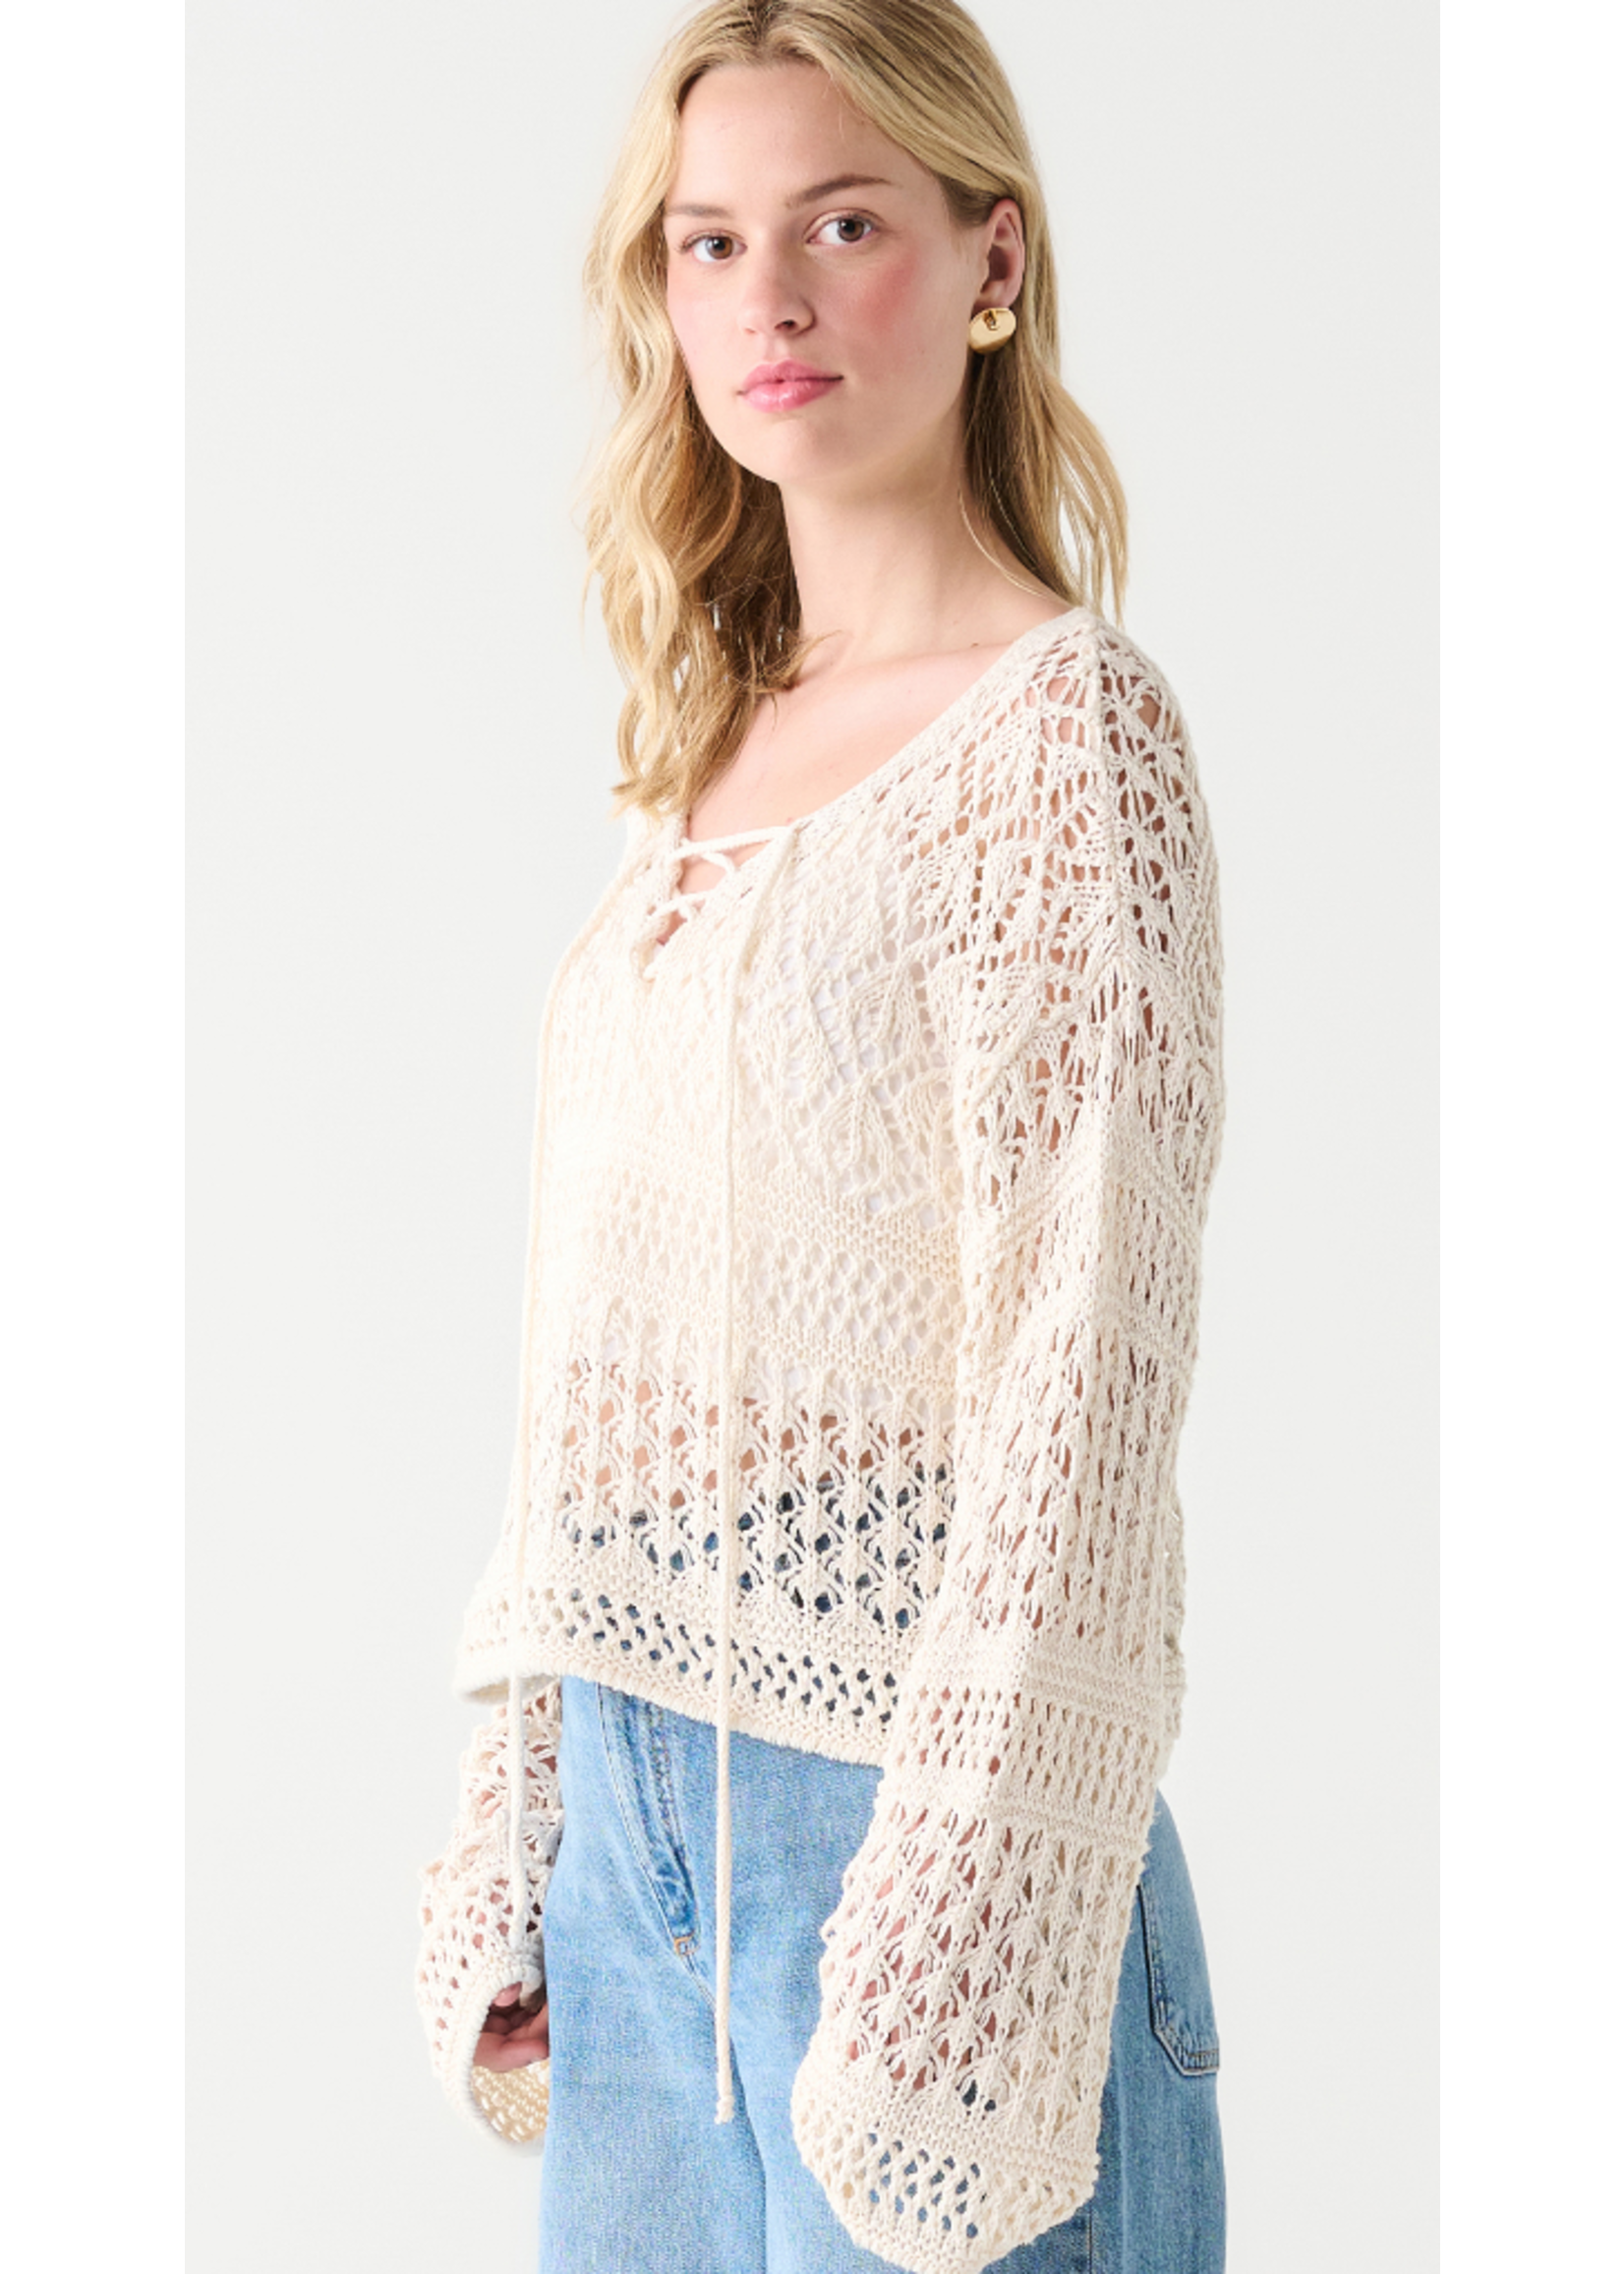 Dex Clothing LACE UP CROCHET SWEATER